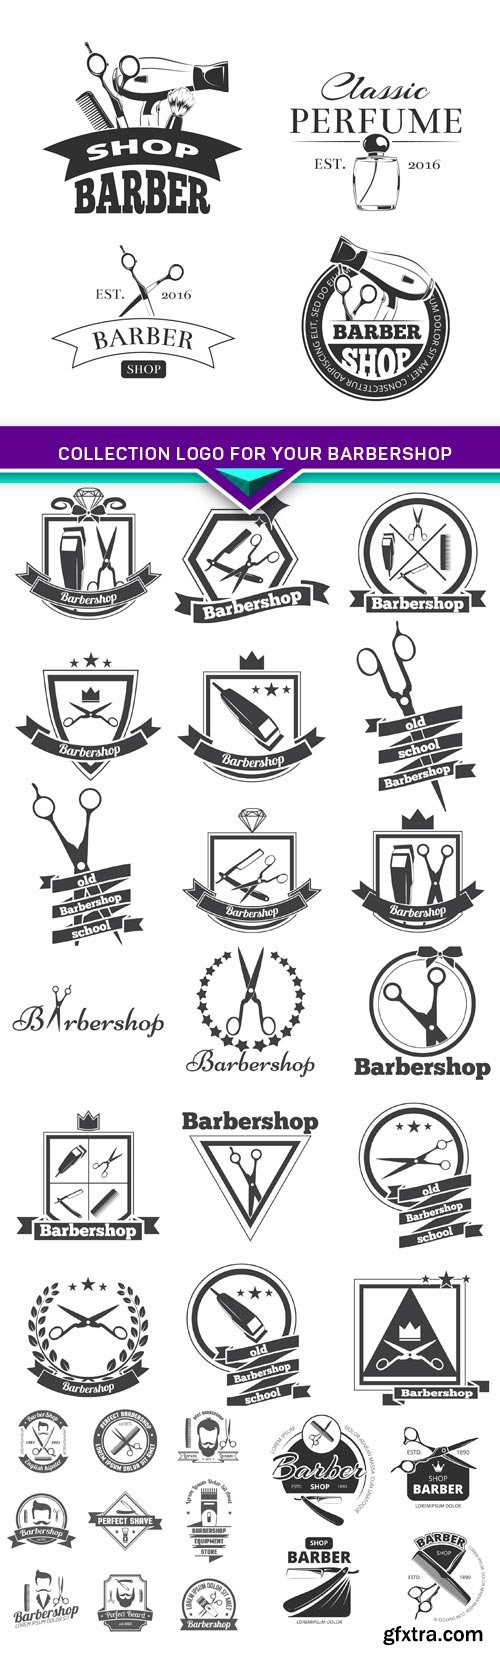 Collection logo for your barbershop 4x EPS